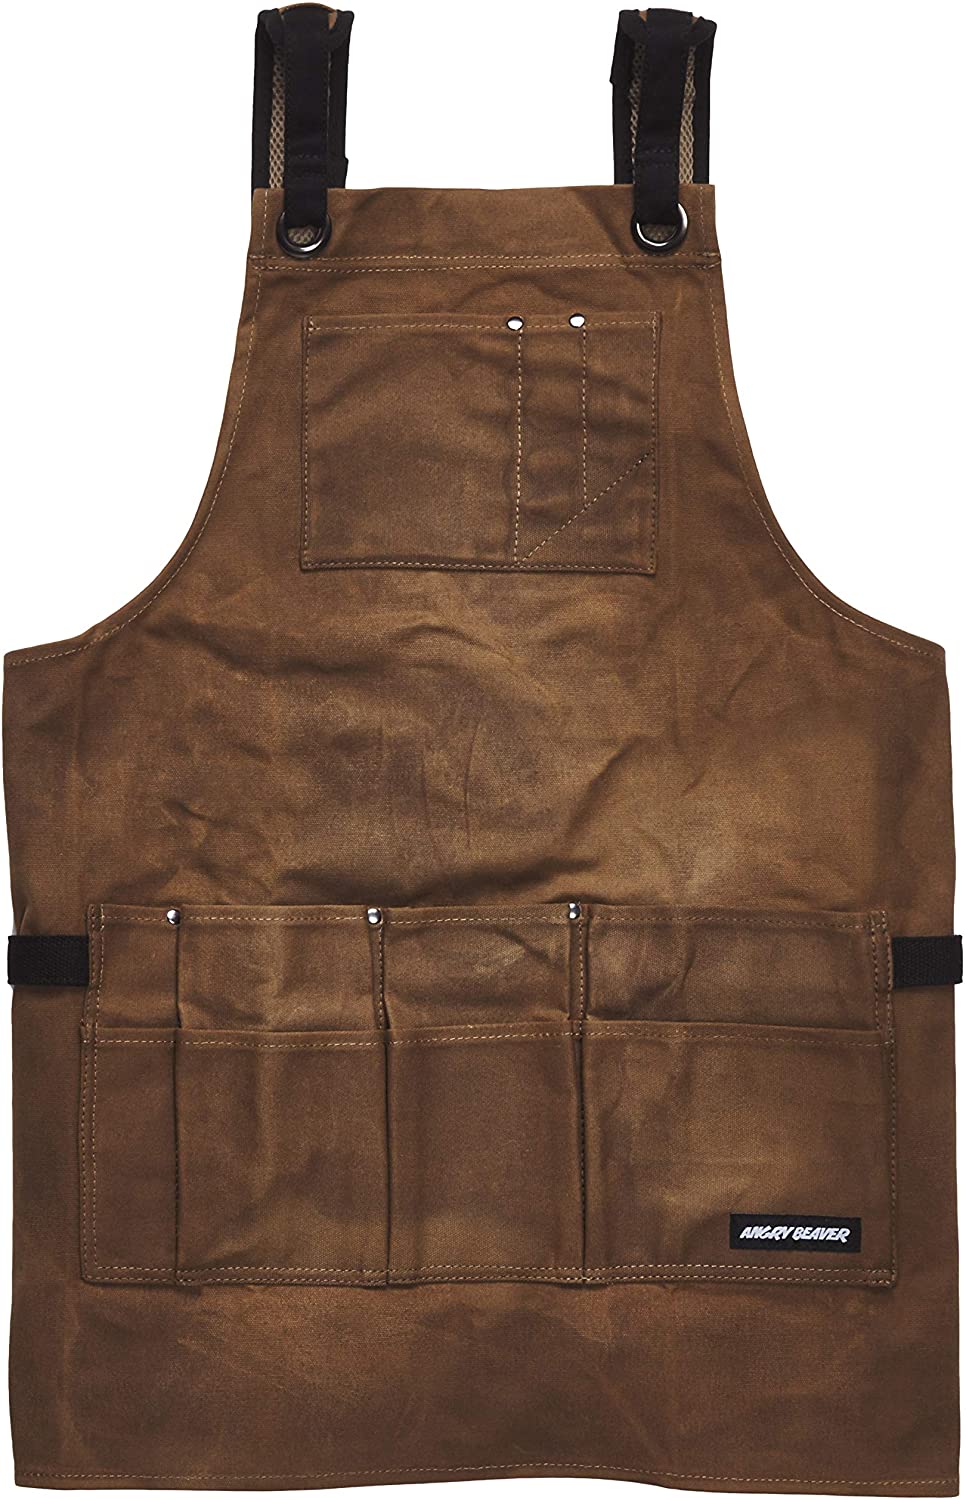 Angry Beaver - Waxed Canvas Work Shop Apron